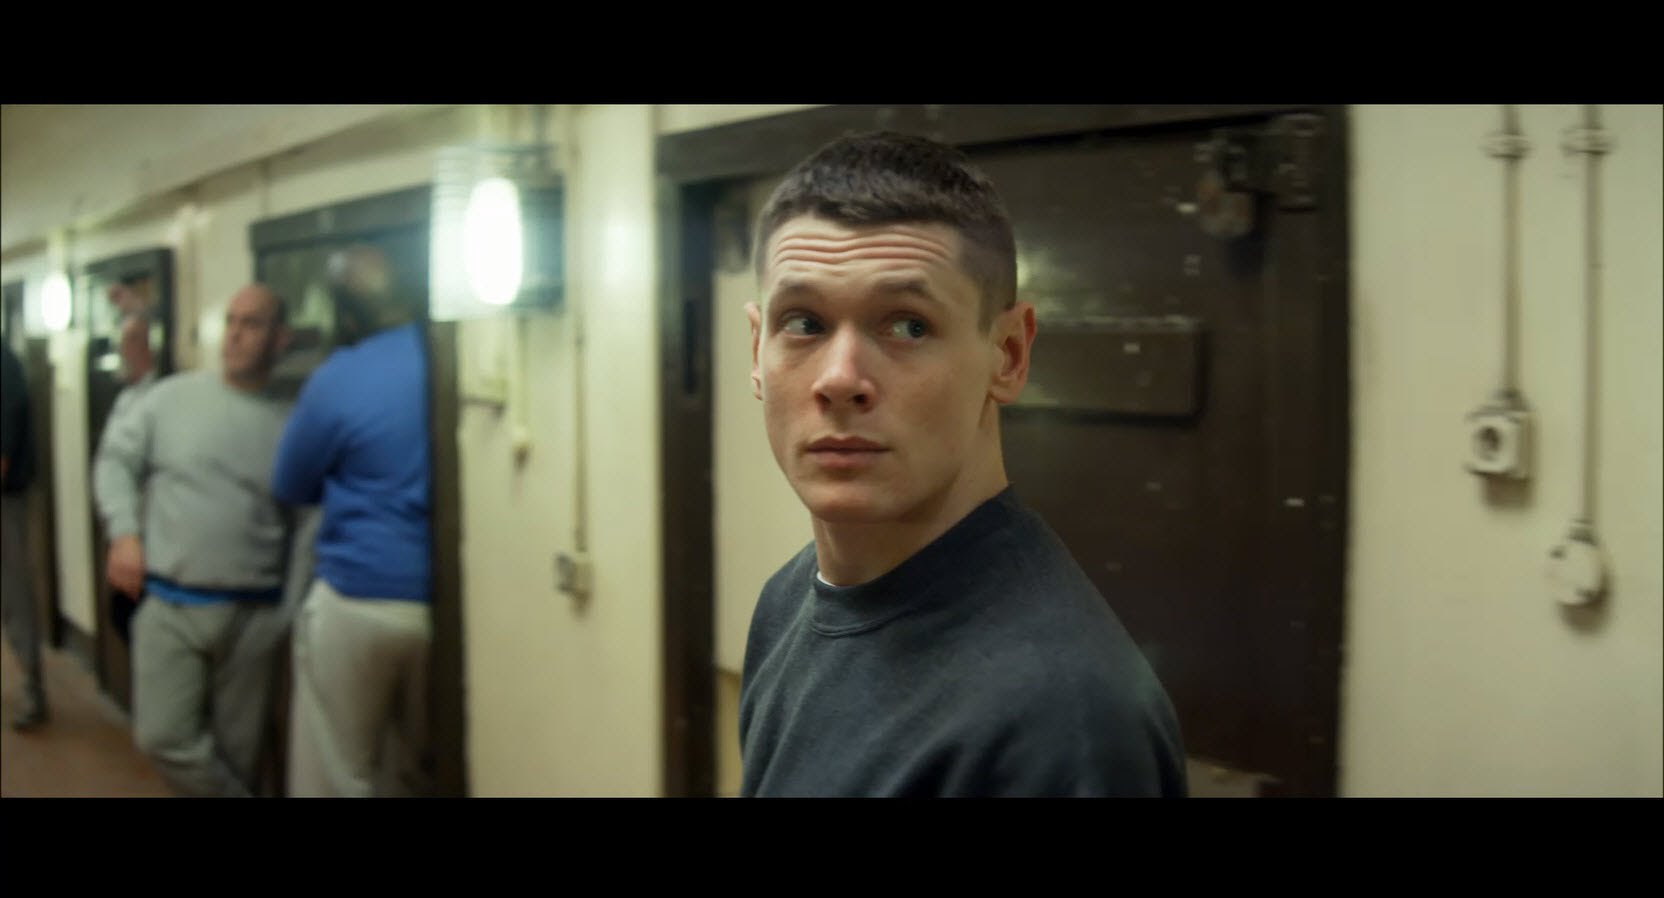 Nice Images Collection: Starred Up Desktop Wallpapers